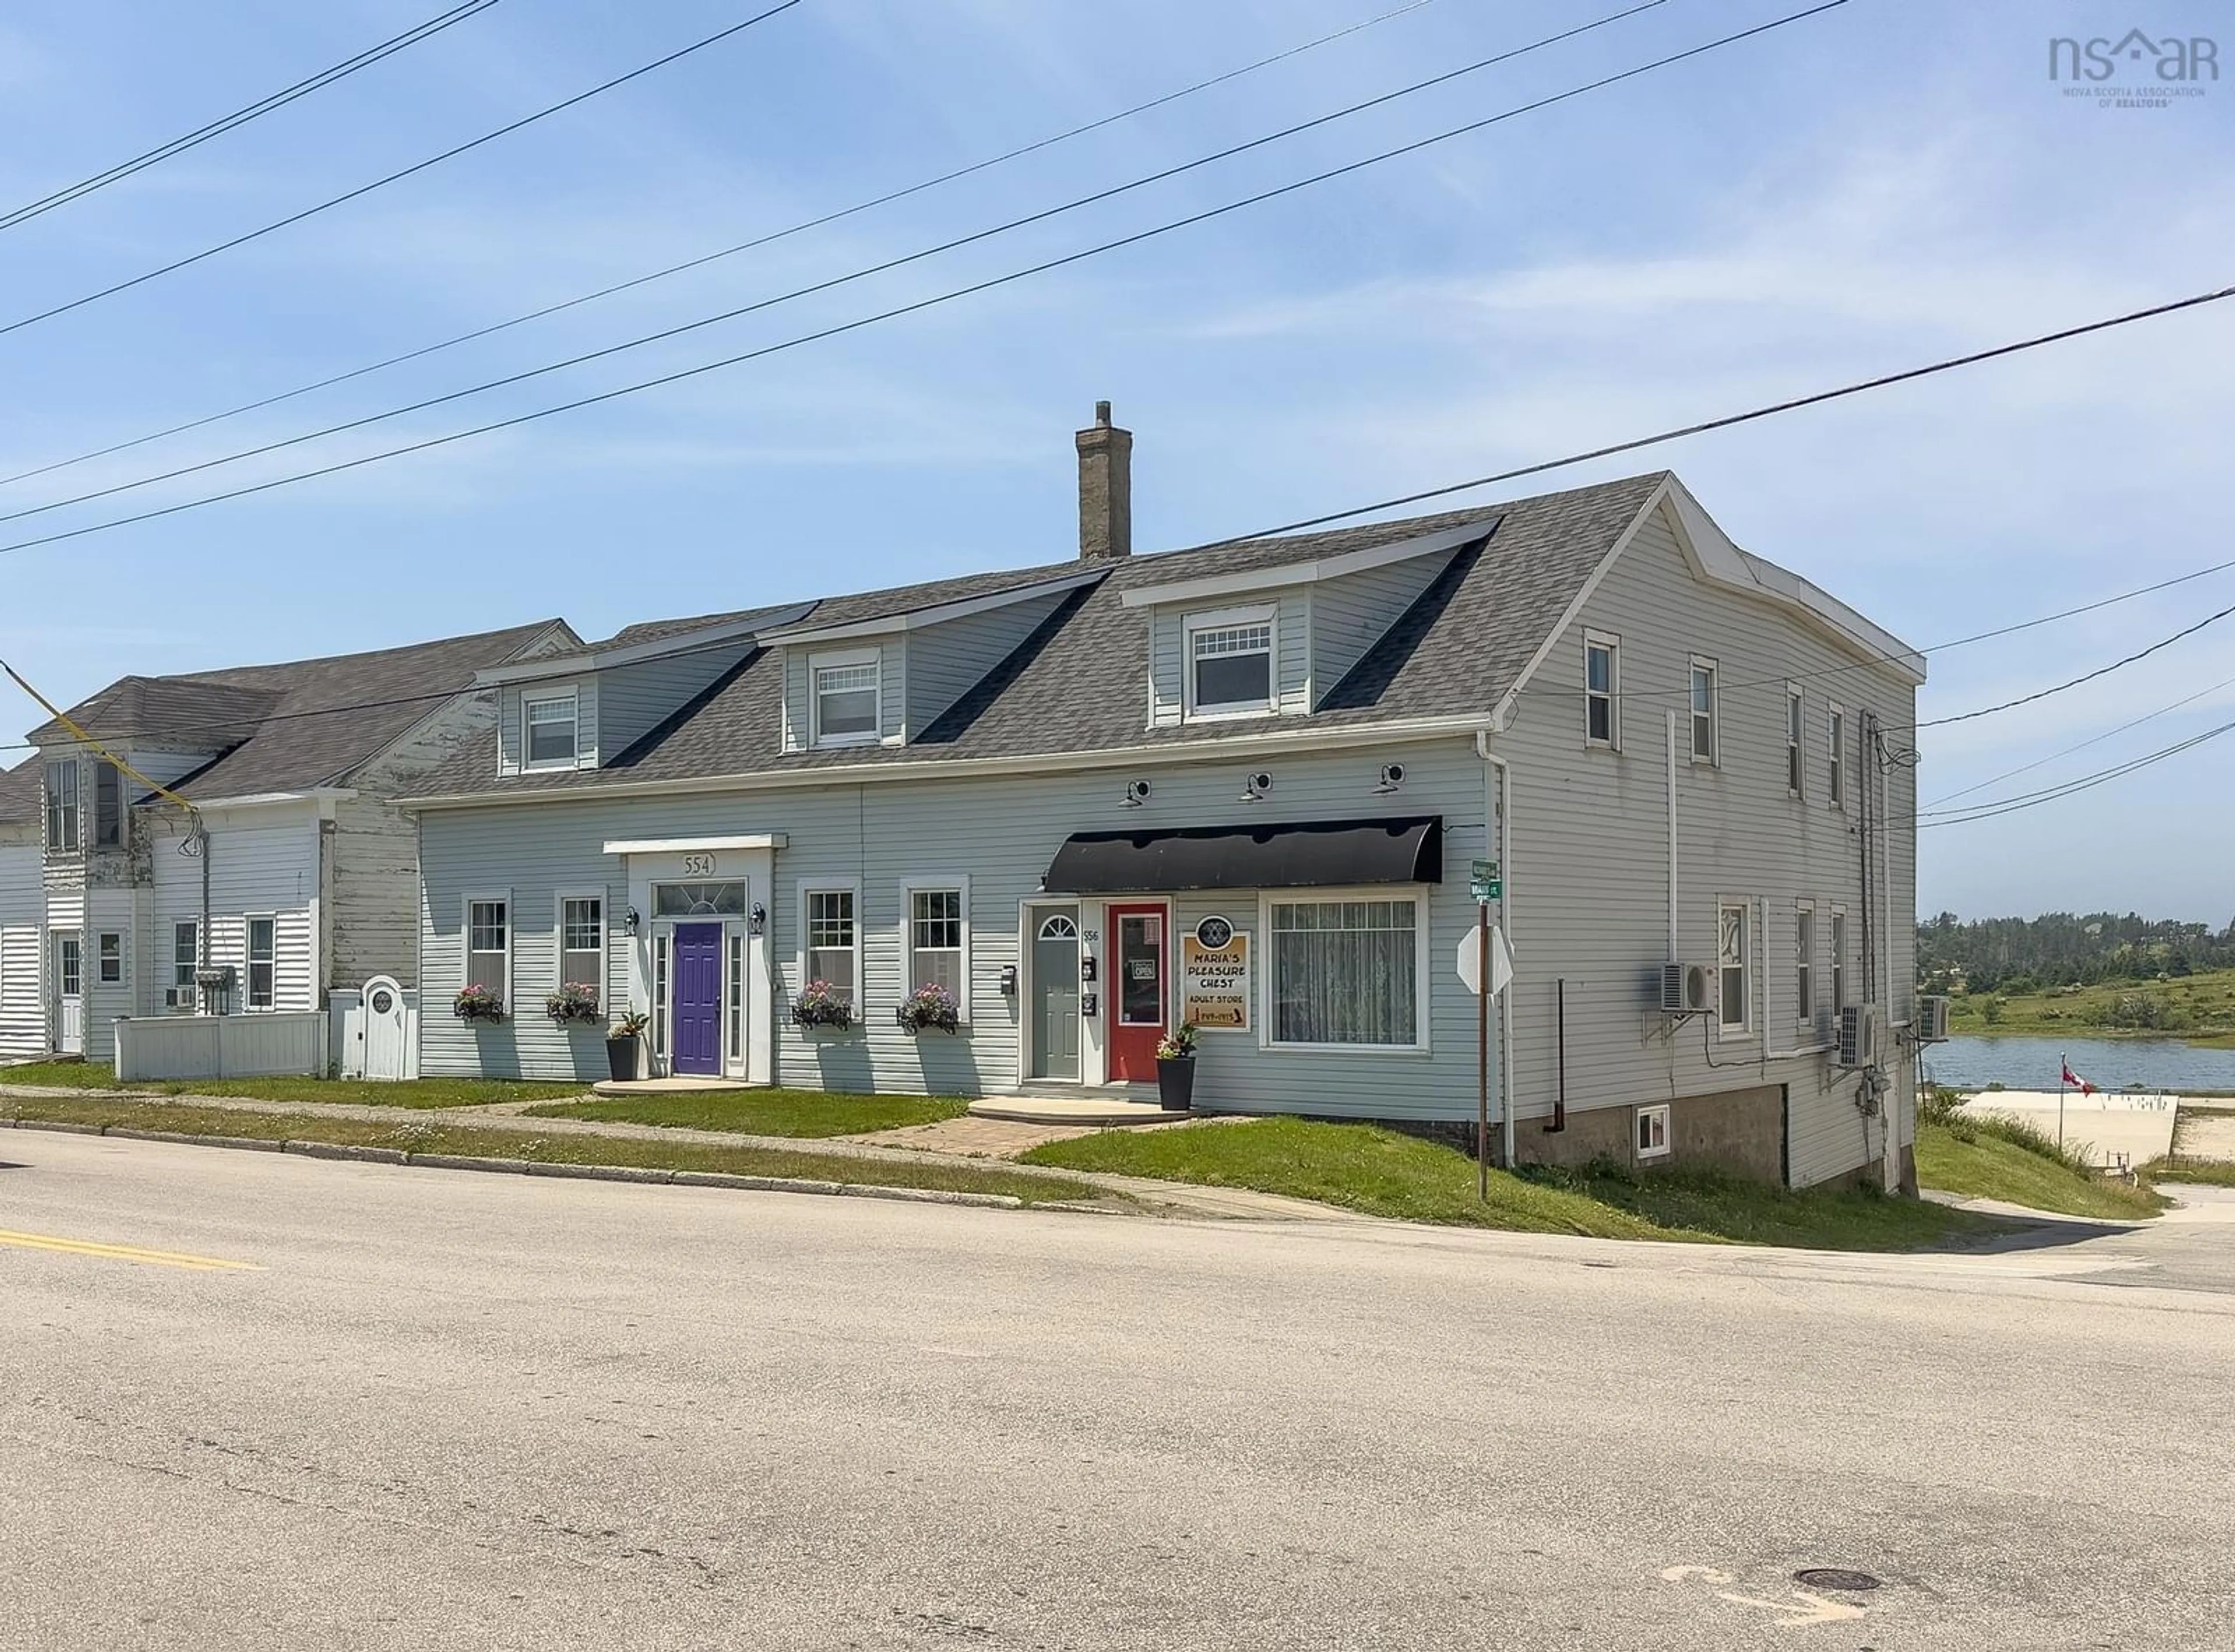 A pic from exterior of the house or condo for 554-556 Main St, Yarmouth Nova Scotia B5A 1H8